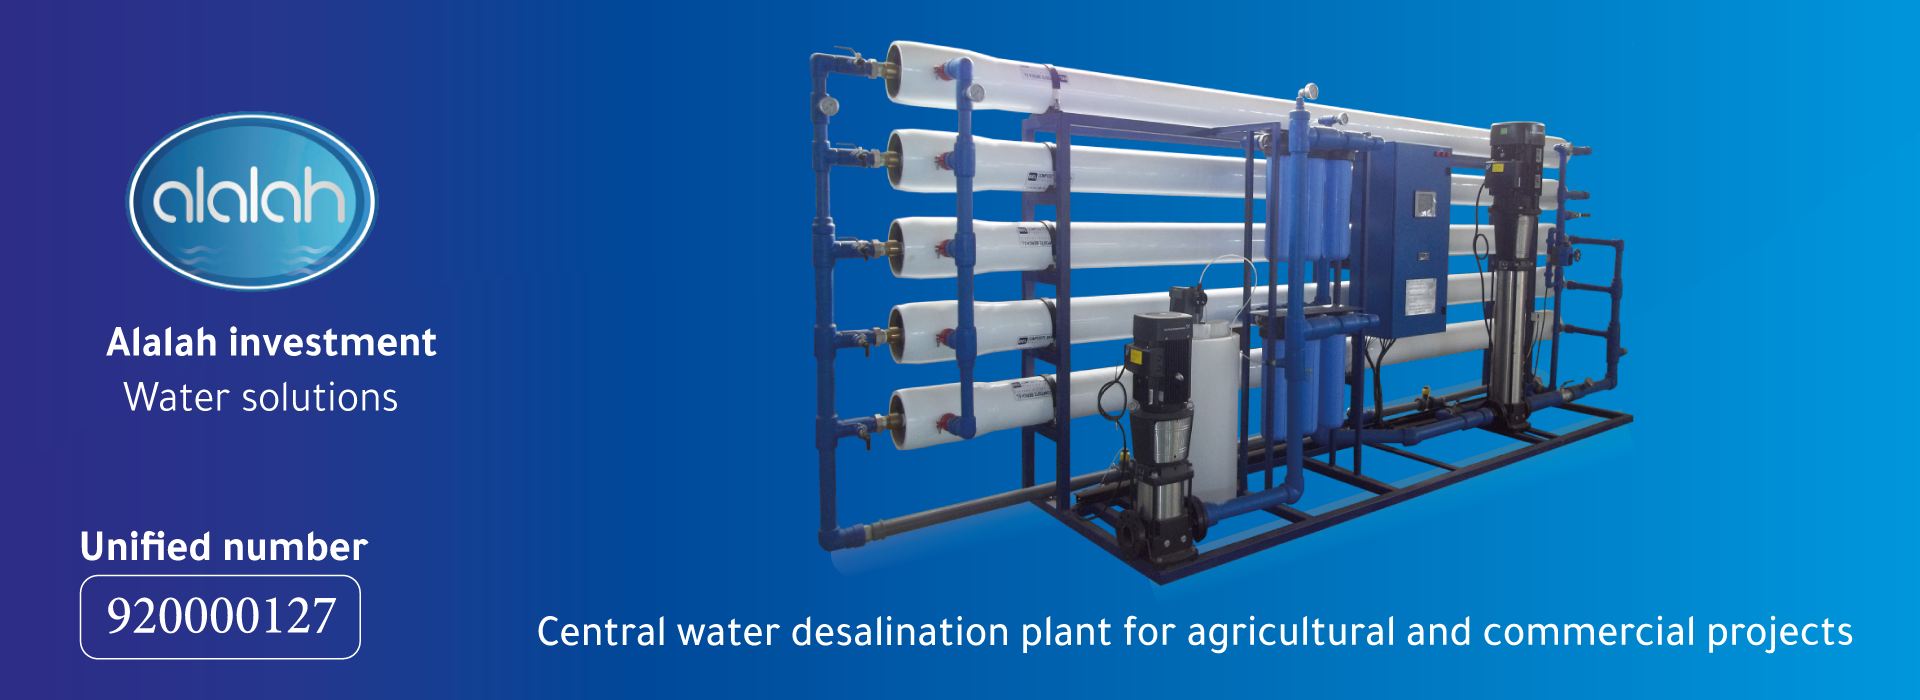 Central water desalination plant for agricultural and commercial projects